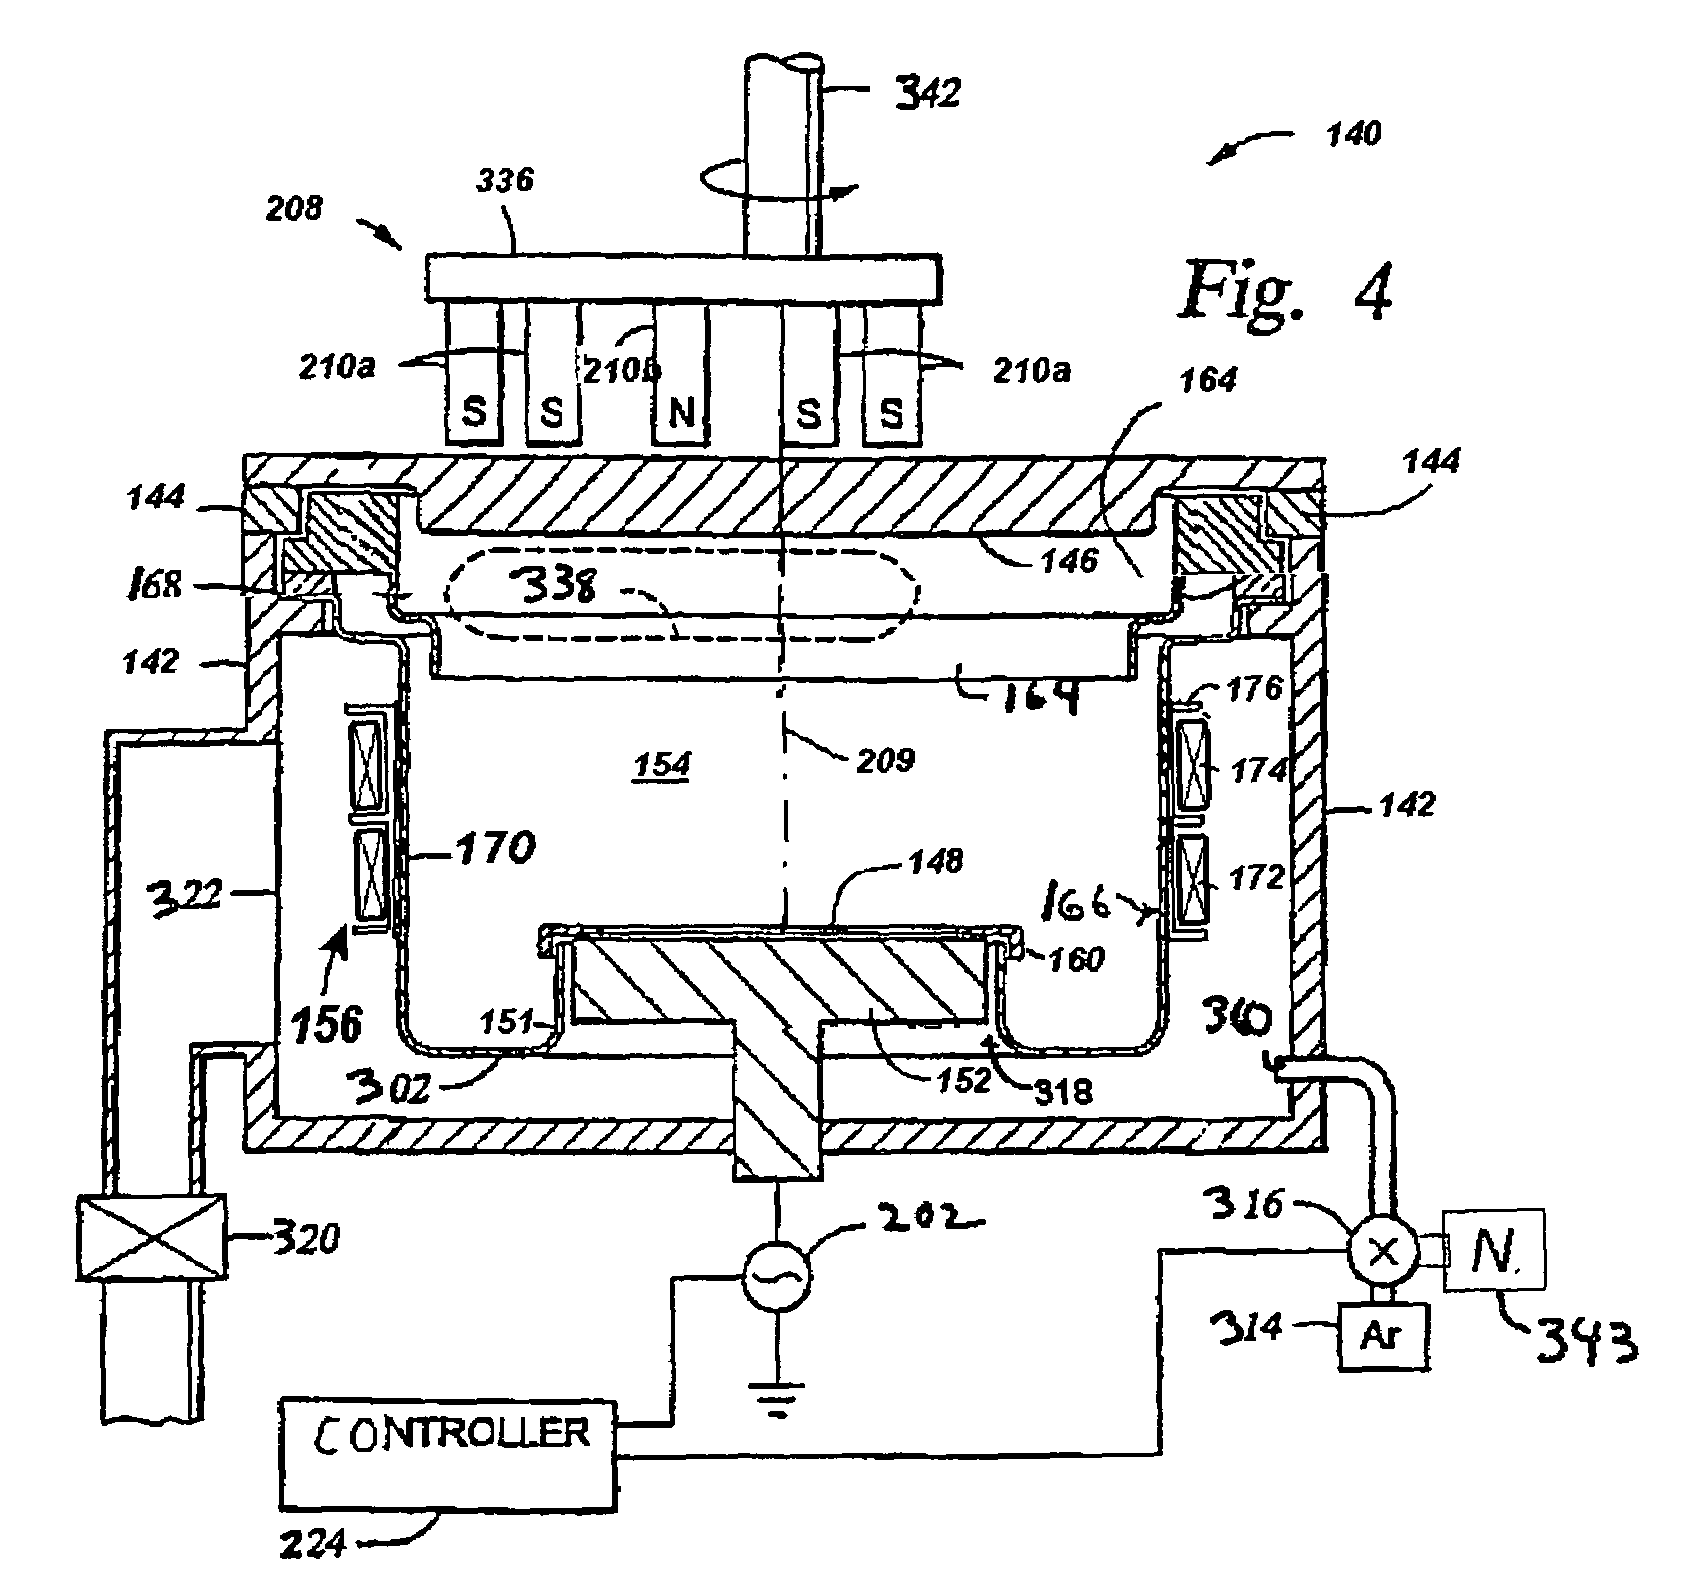 Self-ionized and capacitively-coupled plasma for sputtering and resputtering